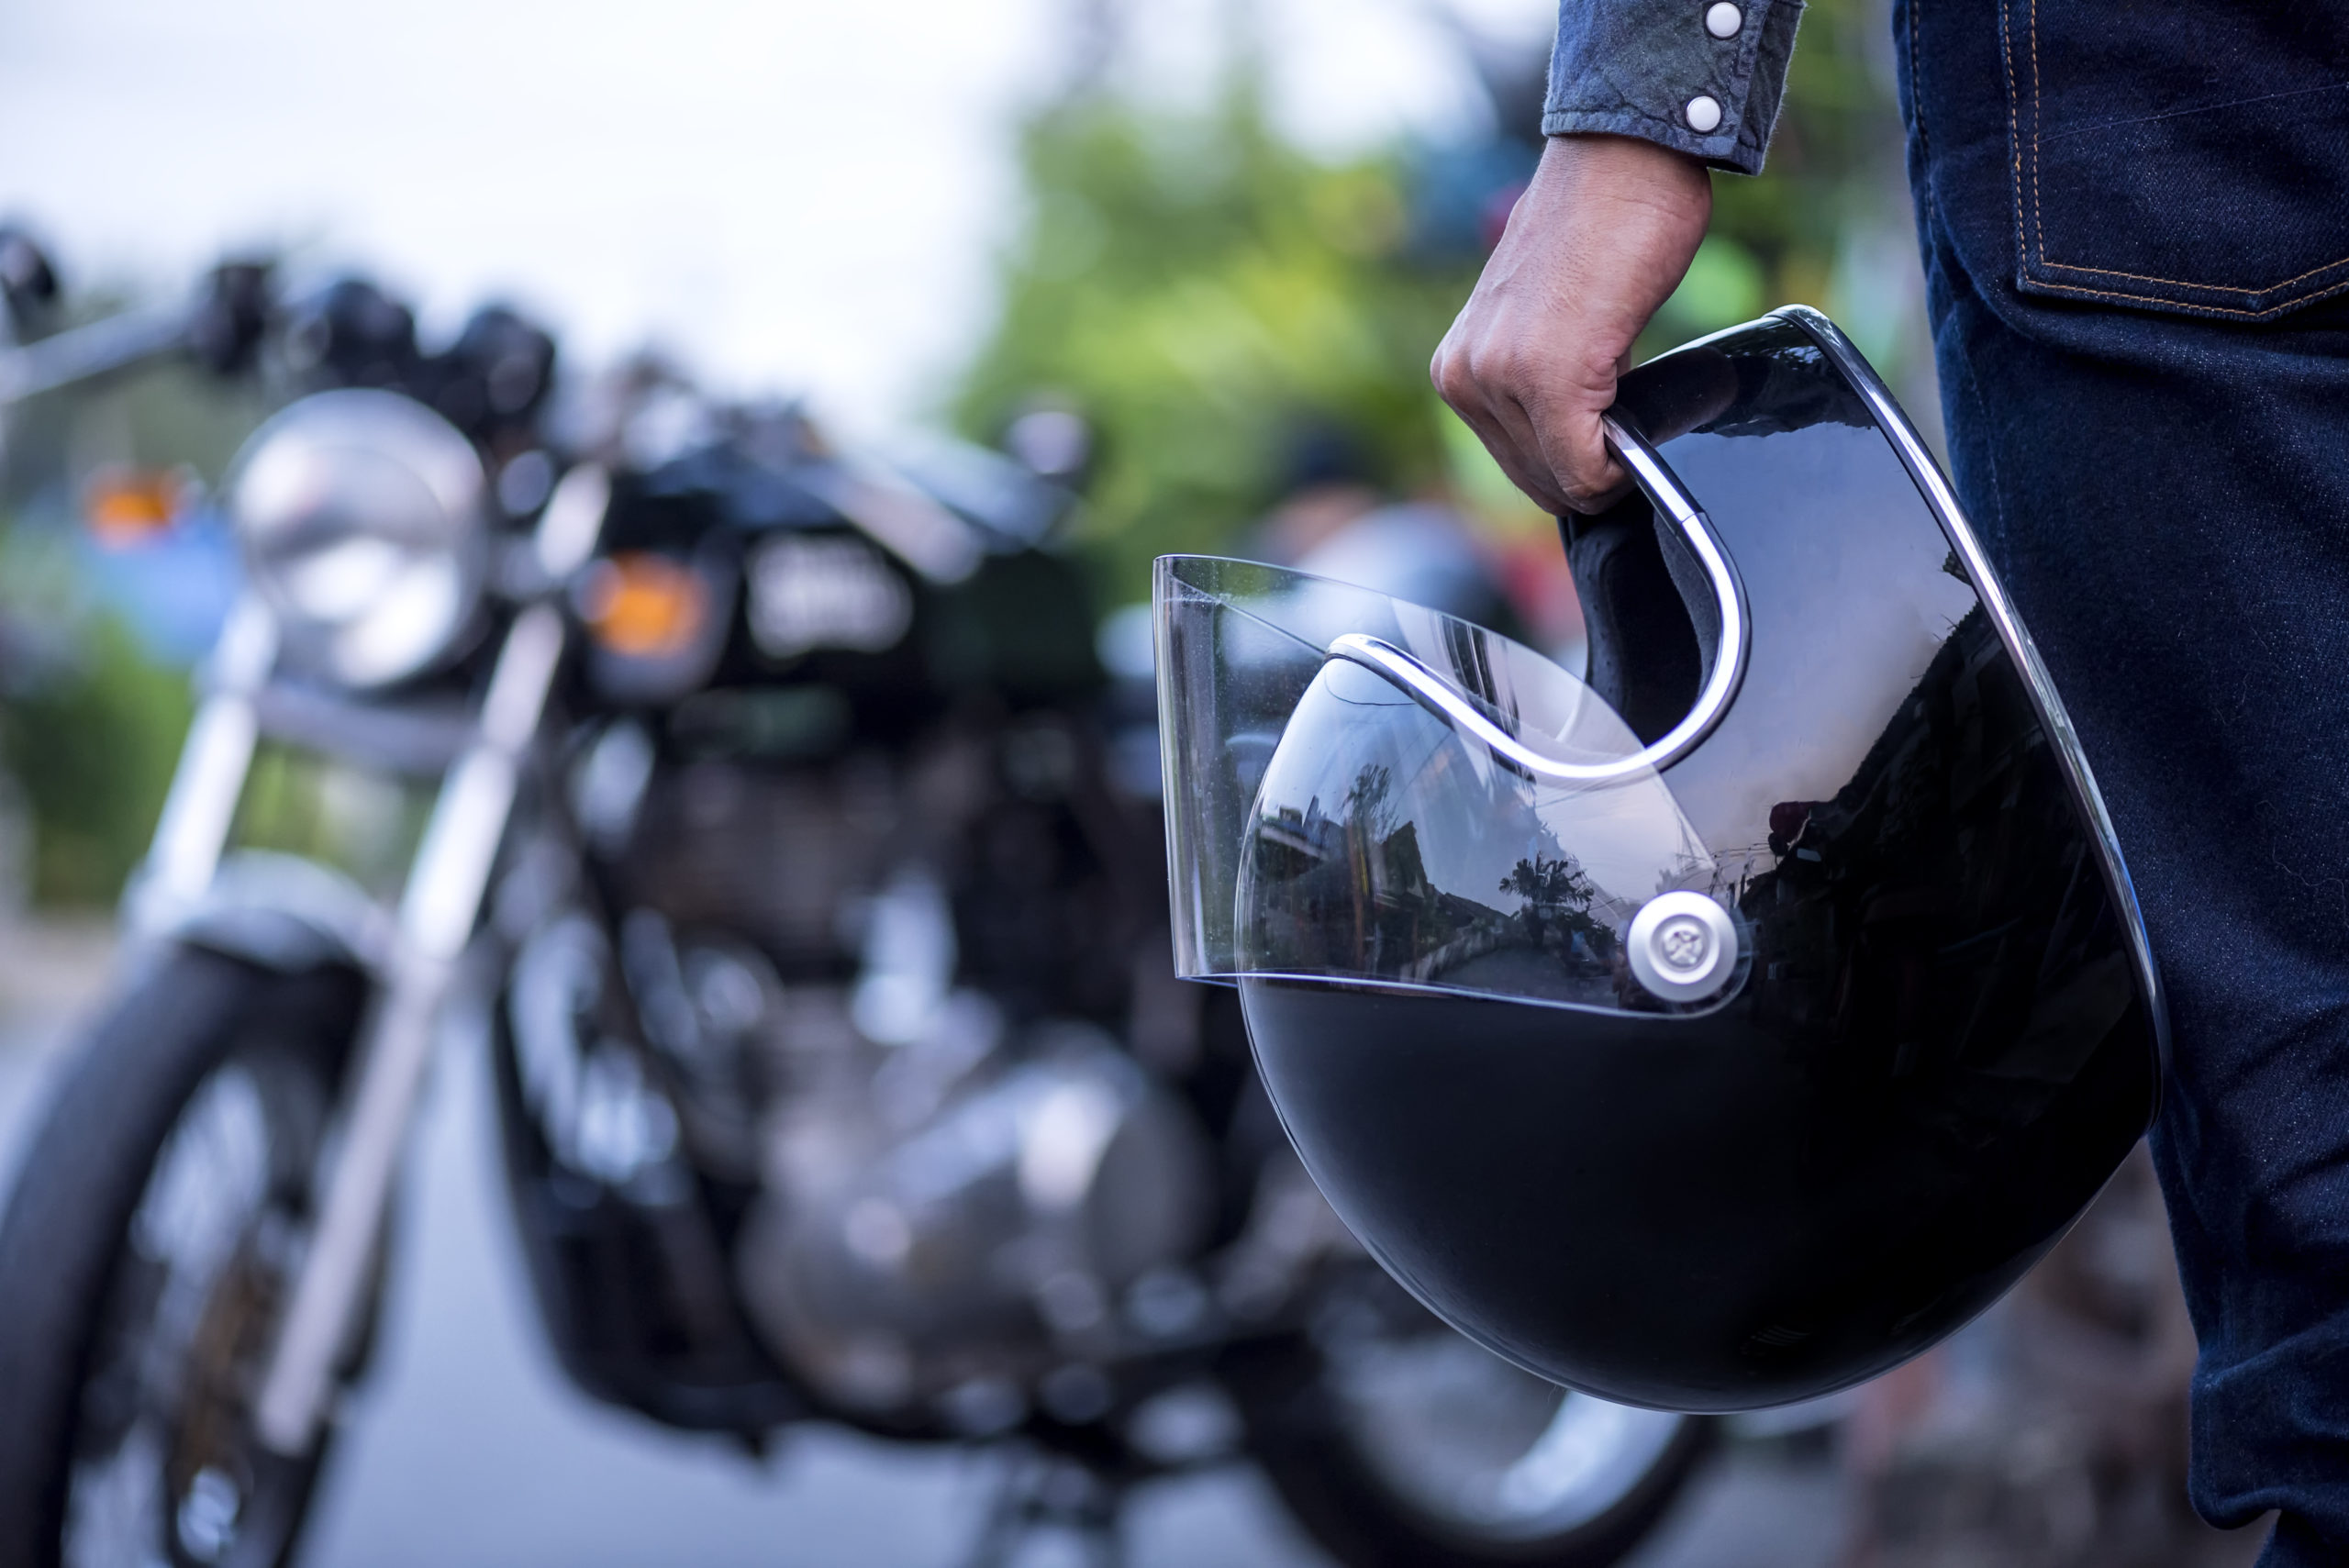 Motorcycle Accident Injuries